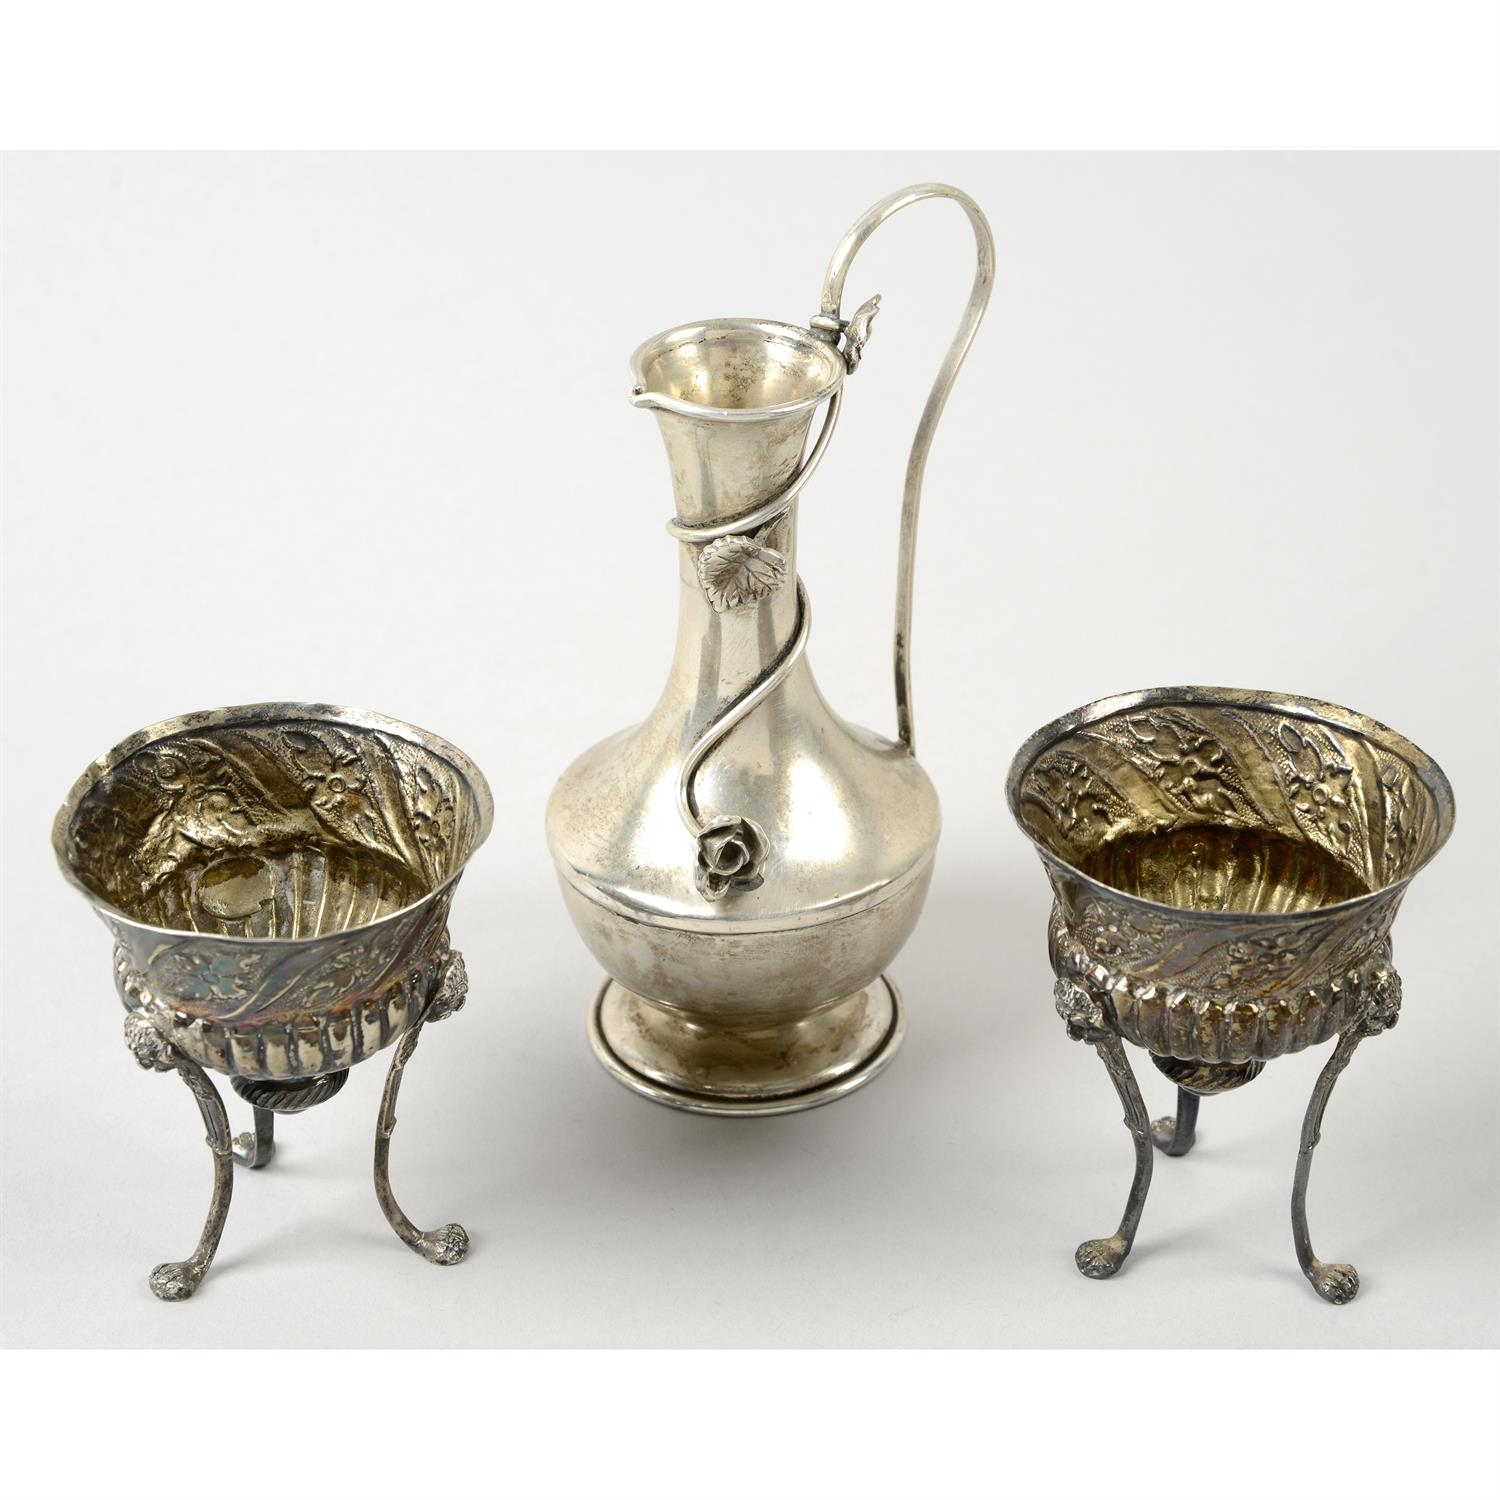 A small continental ewer; together with a pair of dishes on lion head supports.